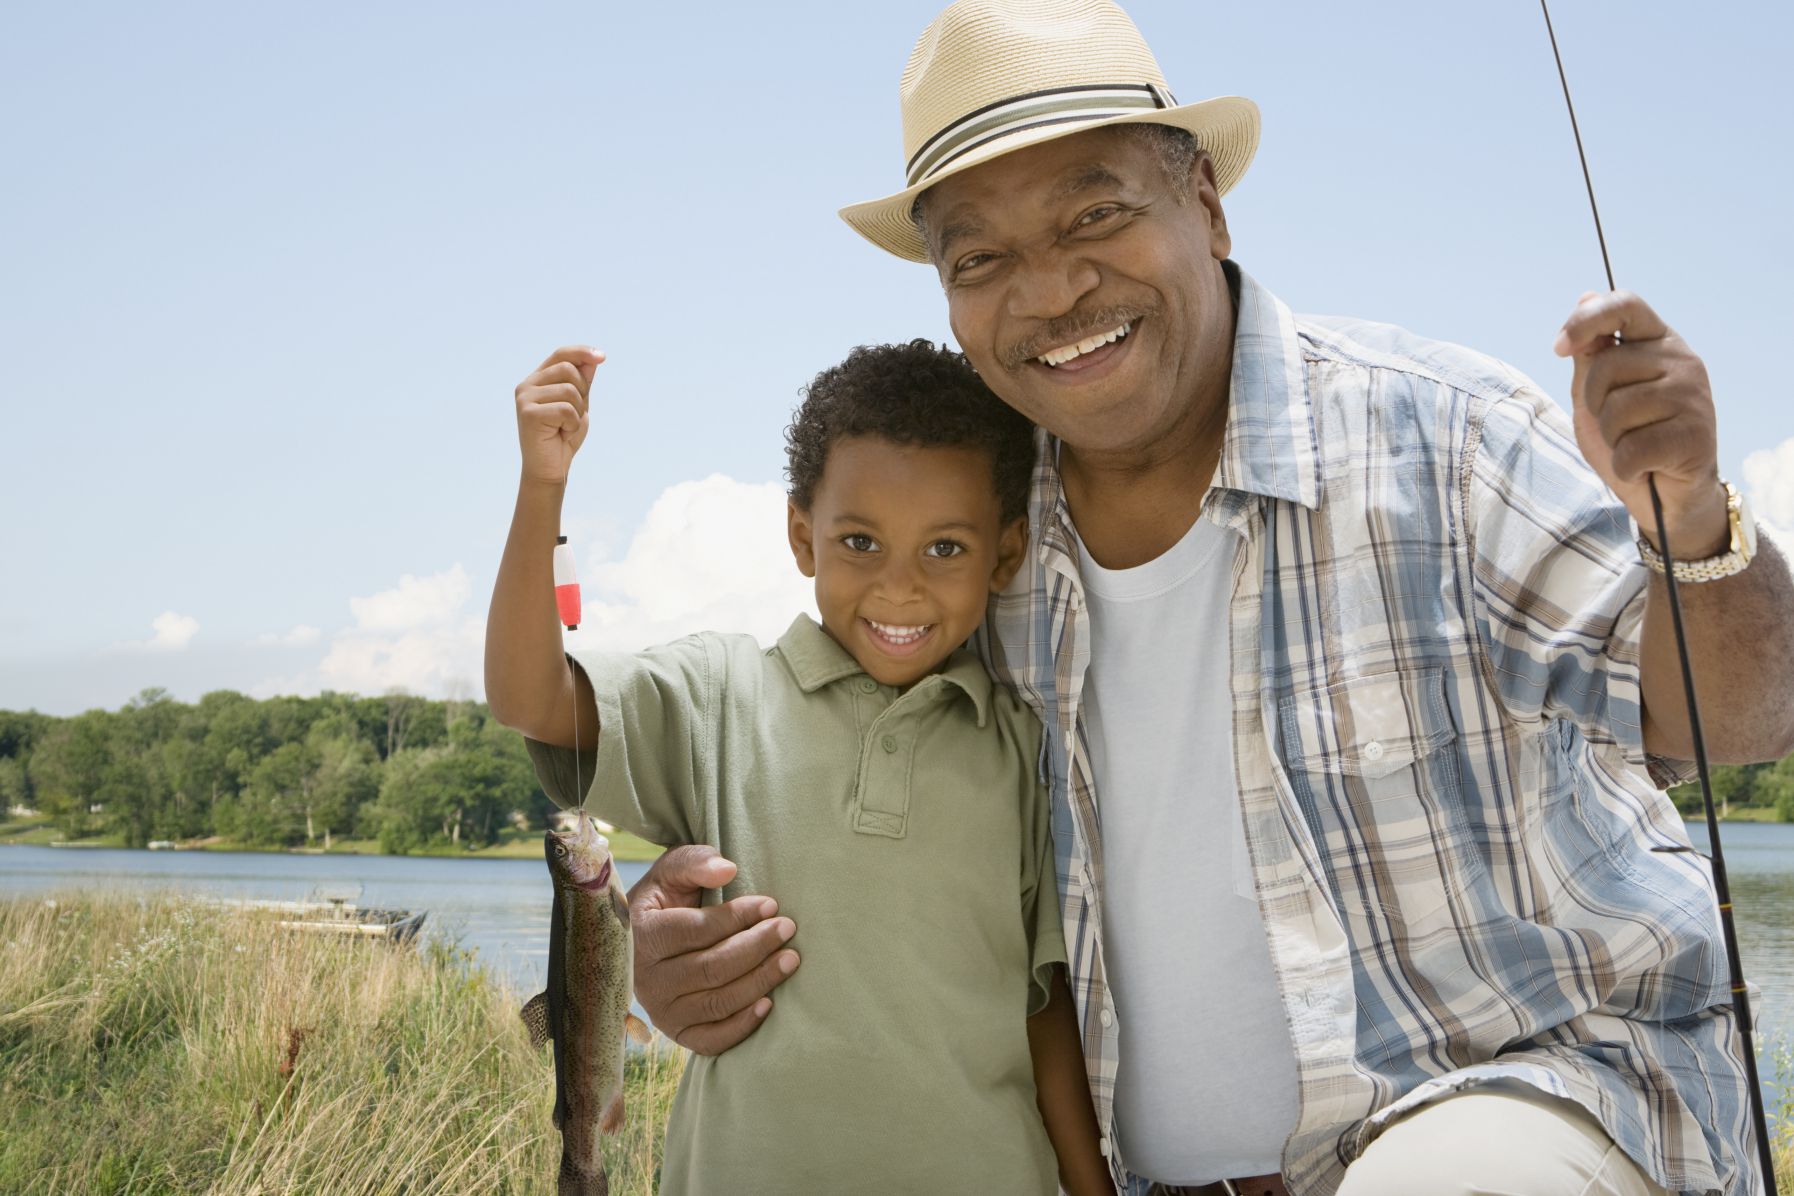 A boy holding a fish and his grandfather holding a fishing pole in front of a body of water.